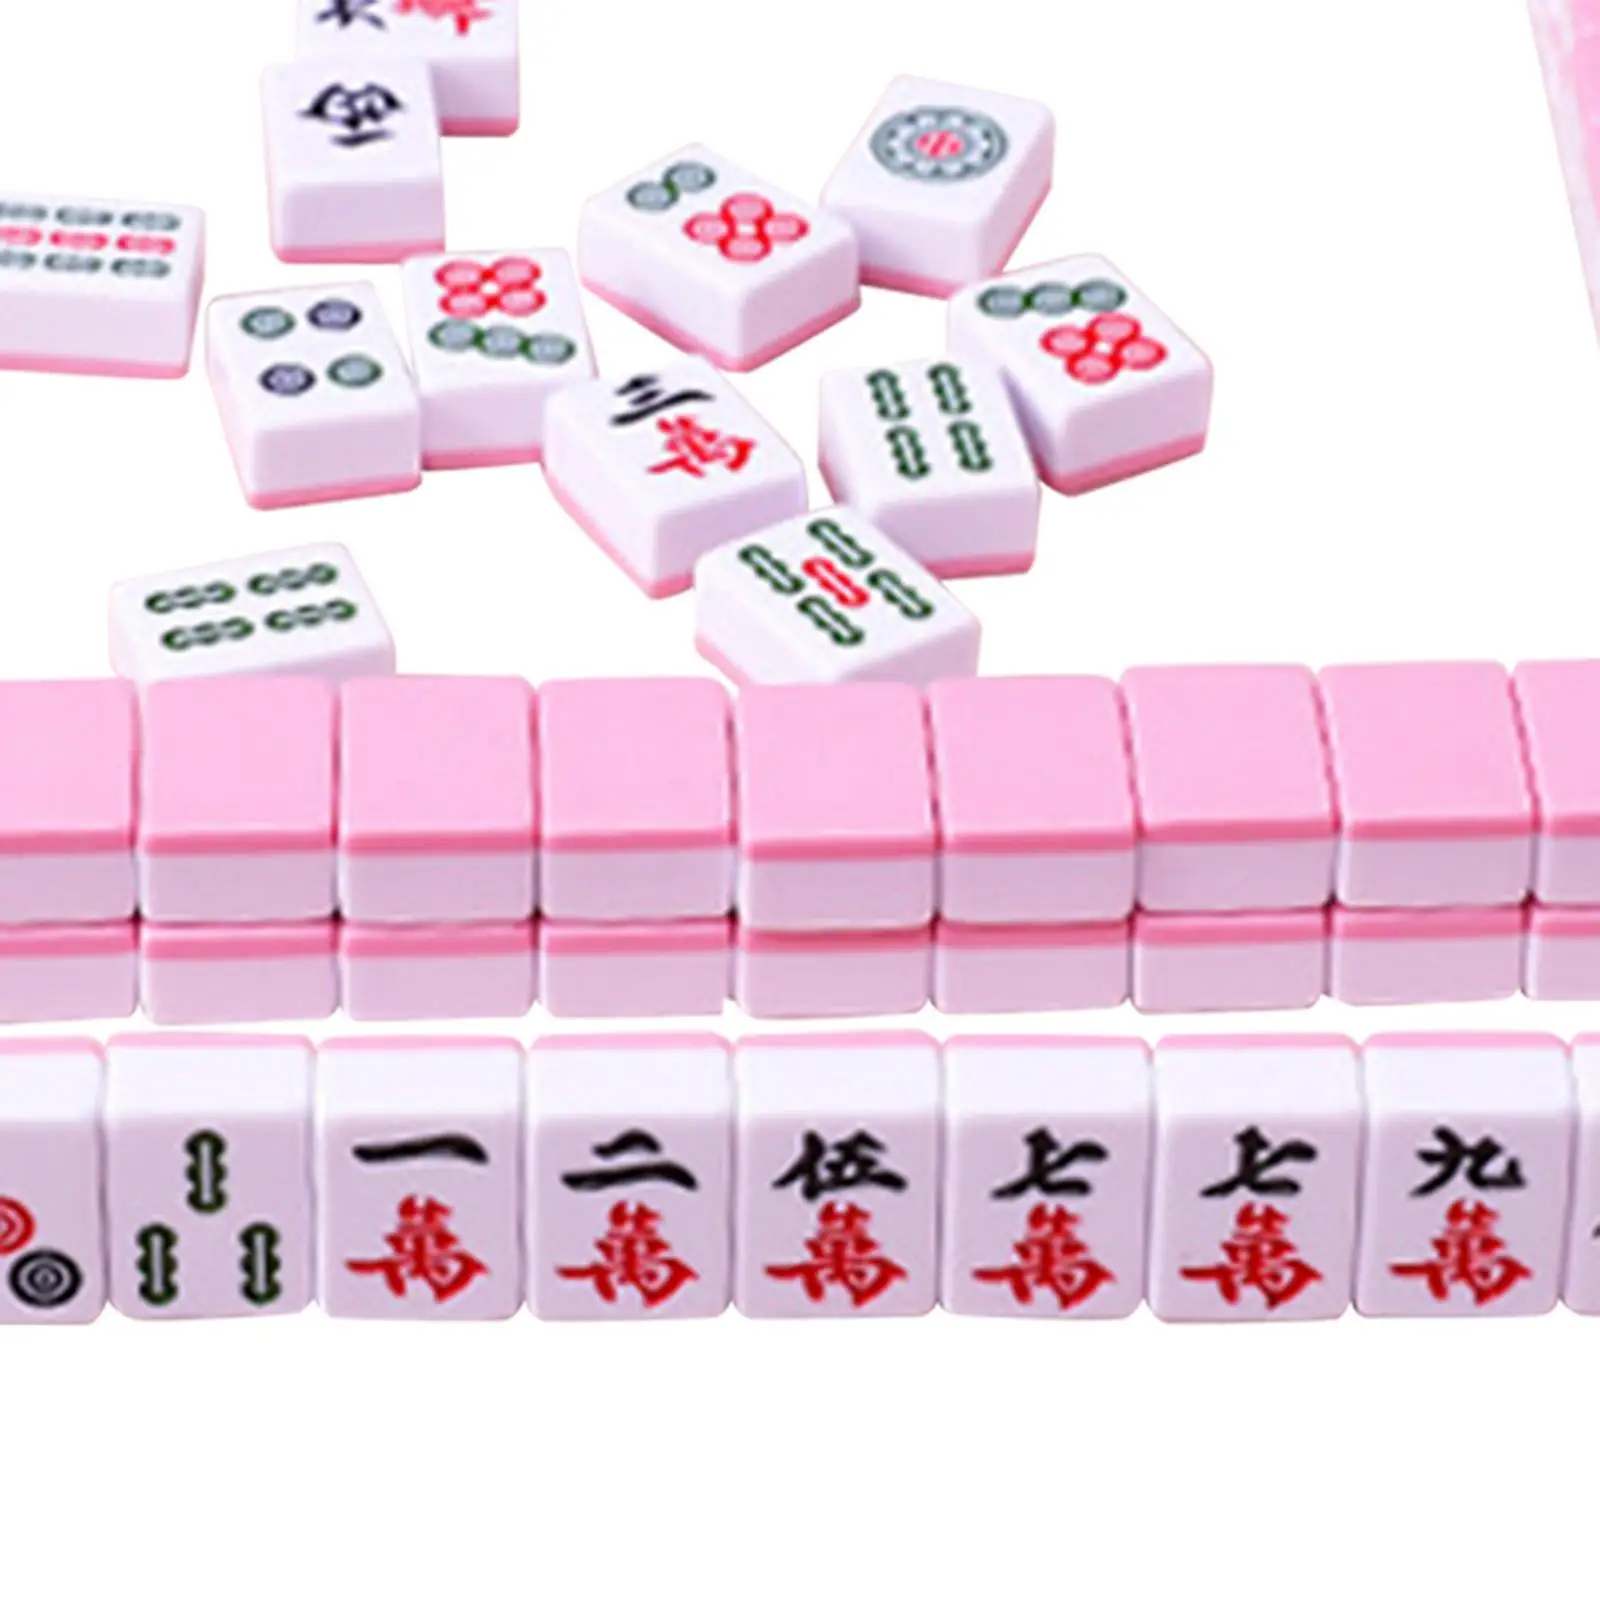 144Pcs Chinese Version Game Set Traditional Party Supplies Mini Mahjong Tiles for Dormitory Apartment Home Friends Adults